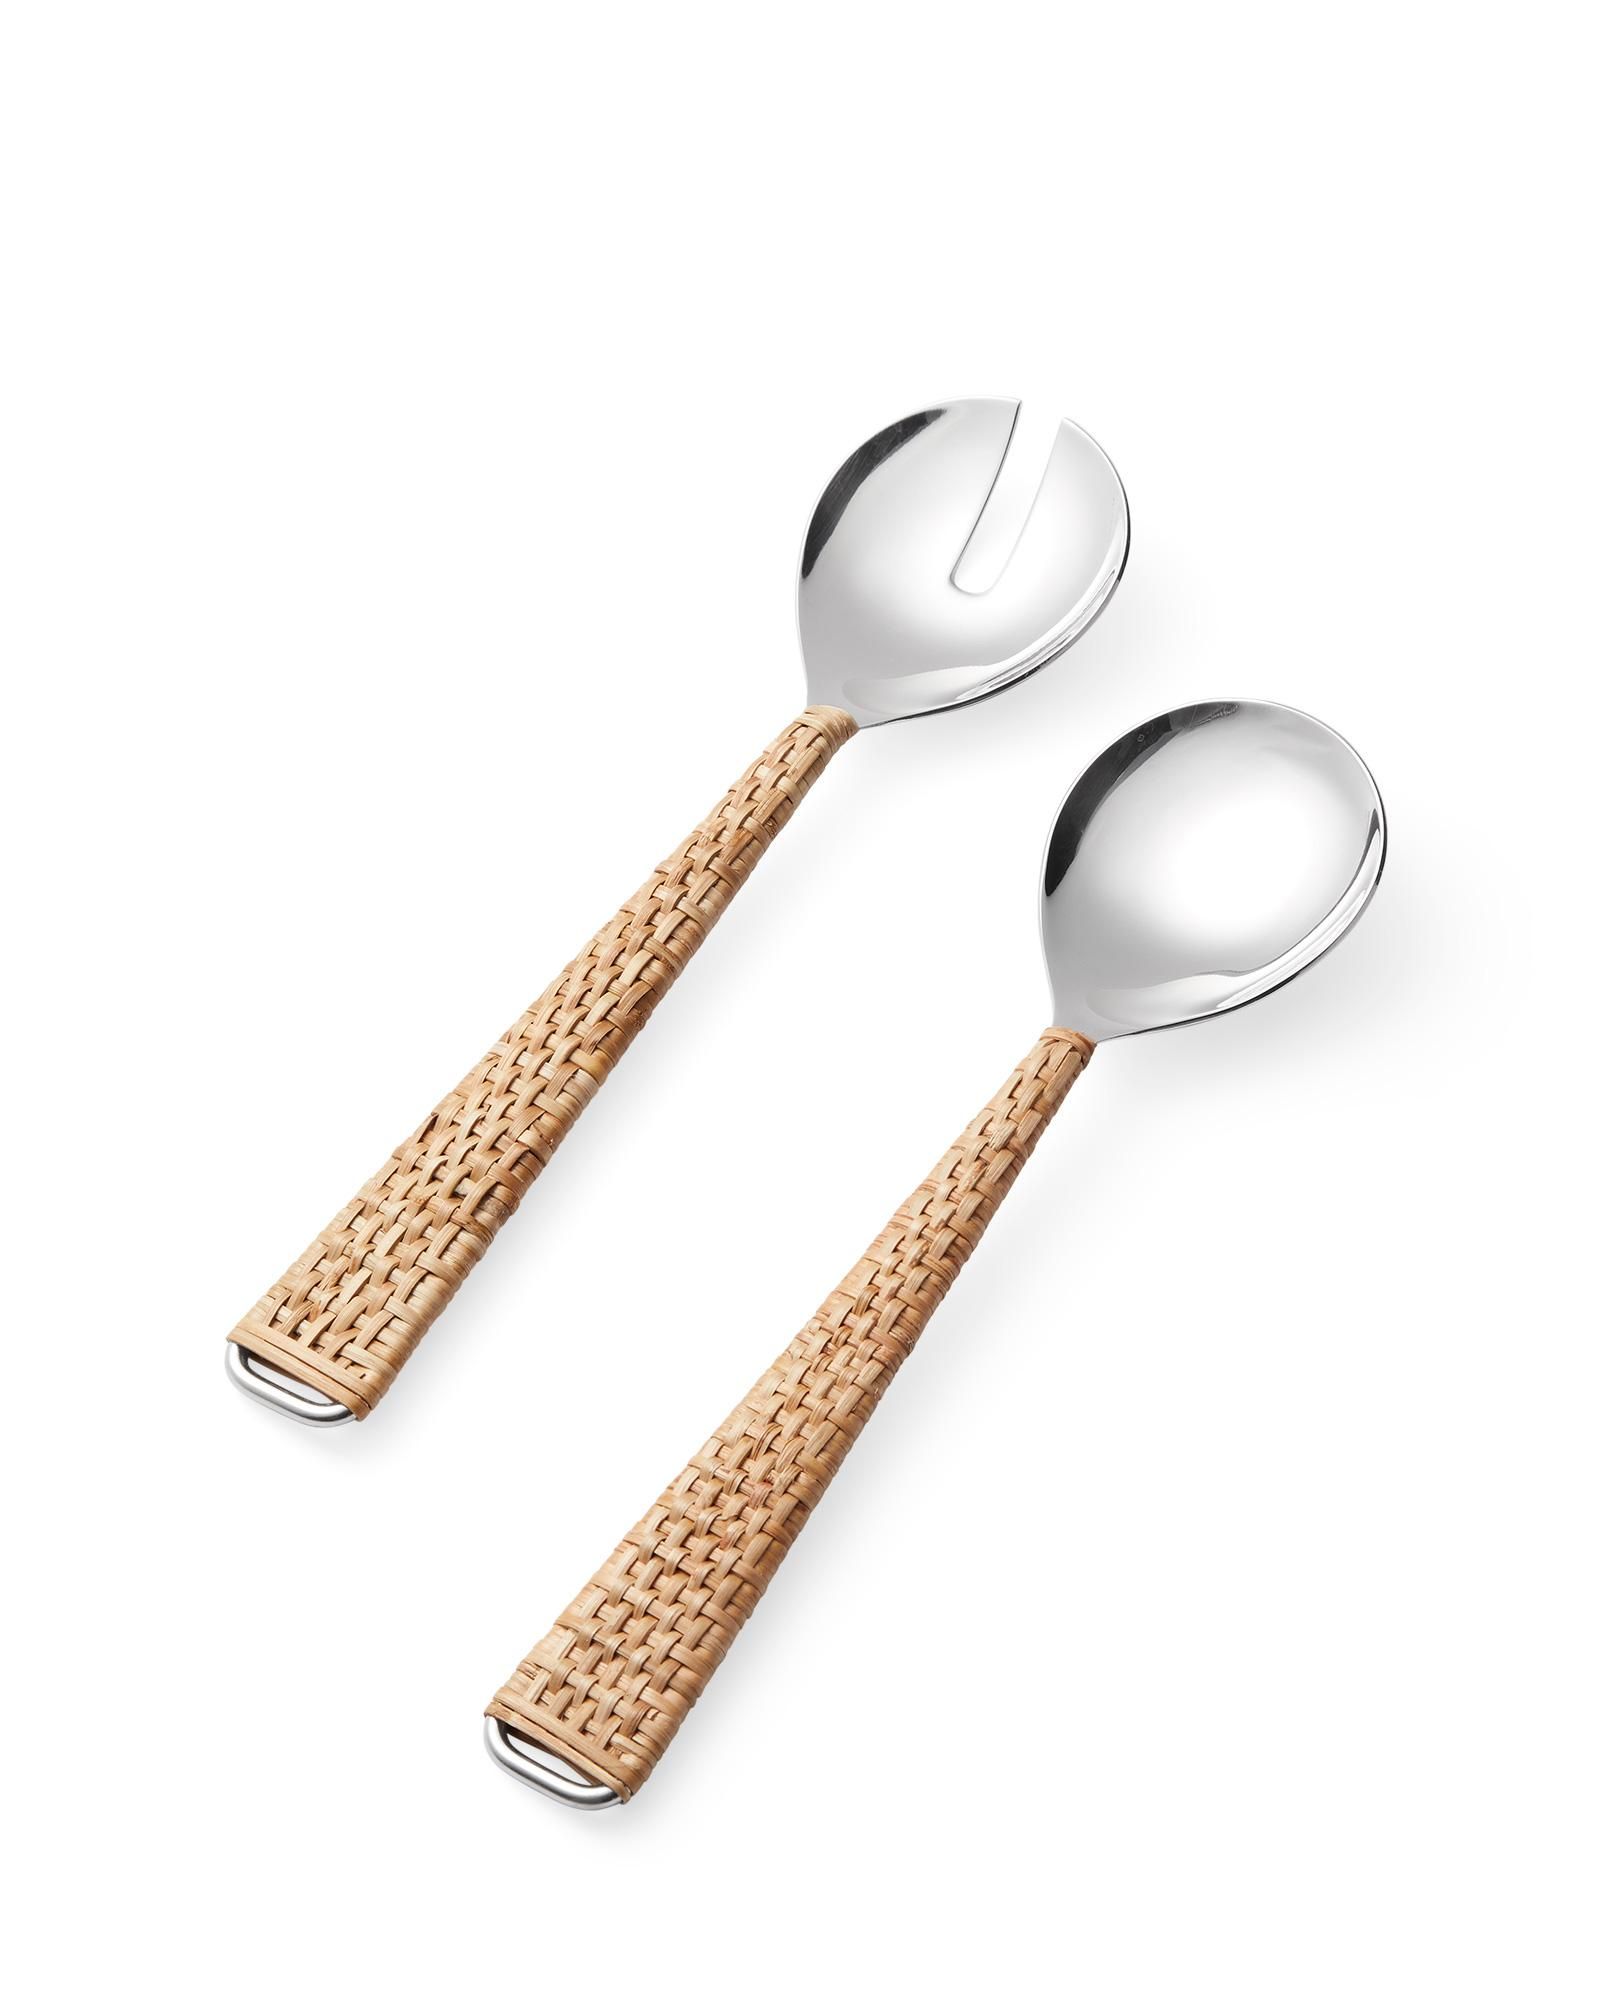 Tulum Serving Set | Serena and Lily